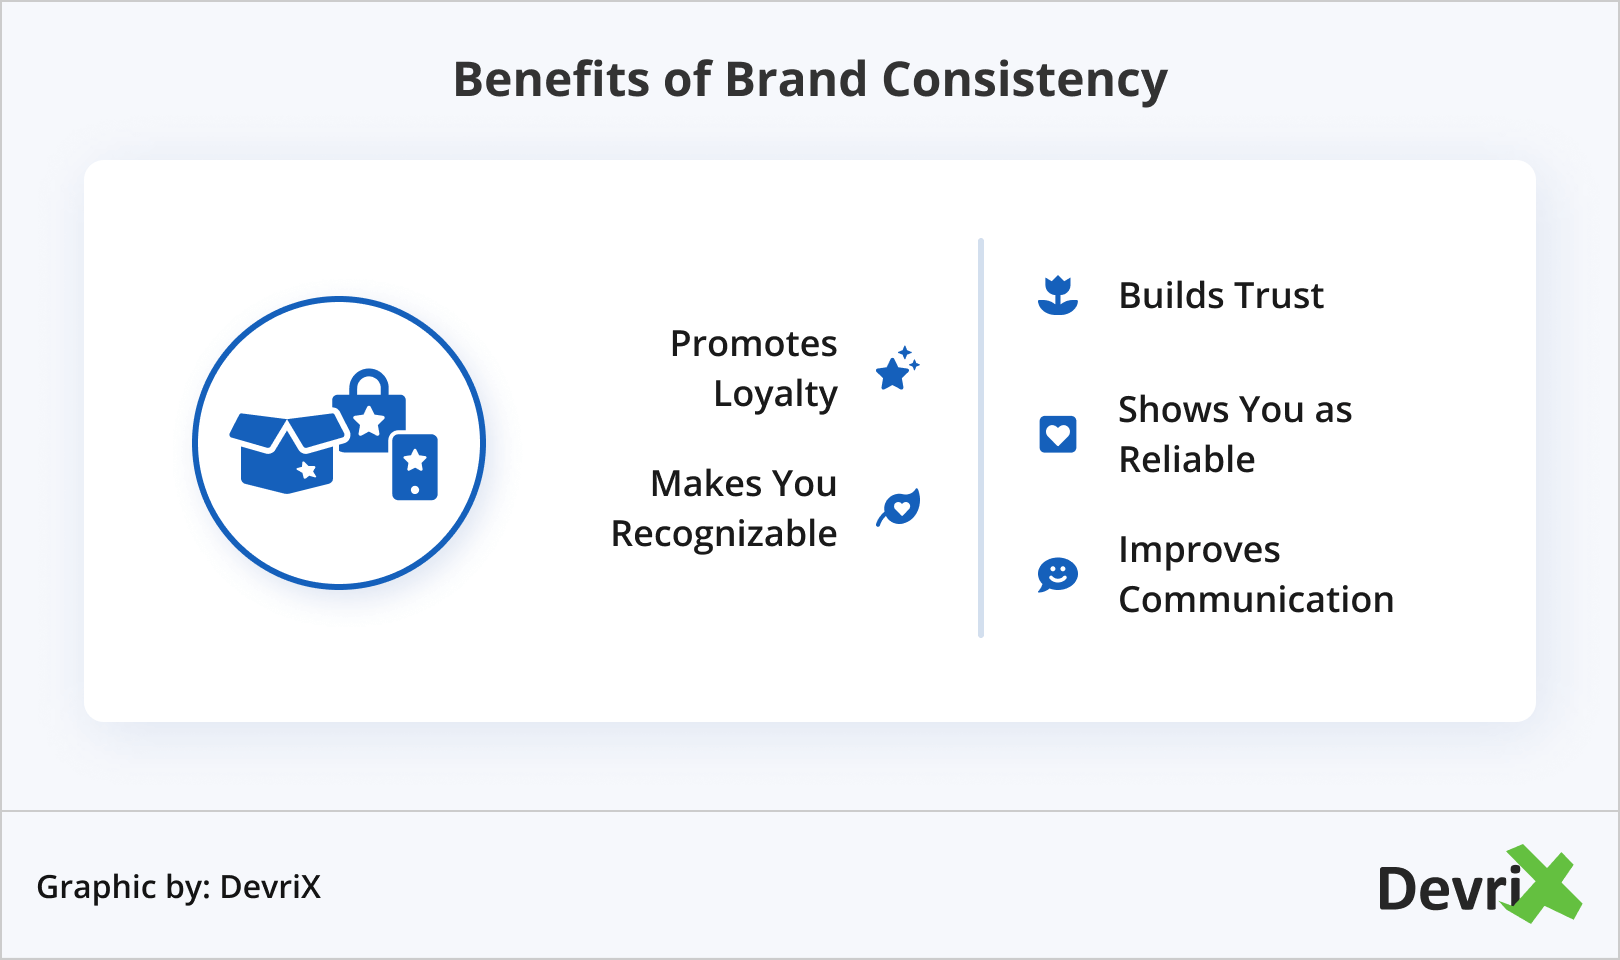 Benefits of Brand Consistency